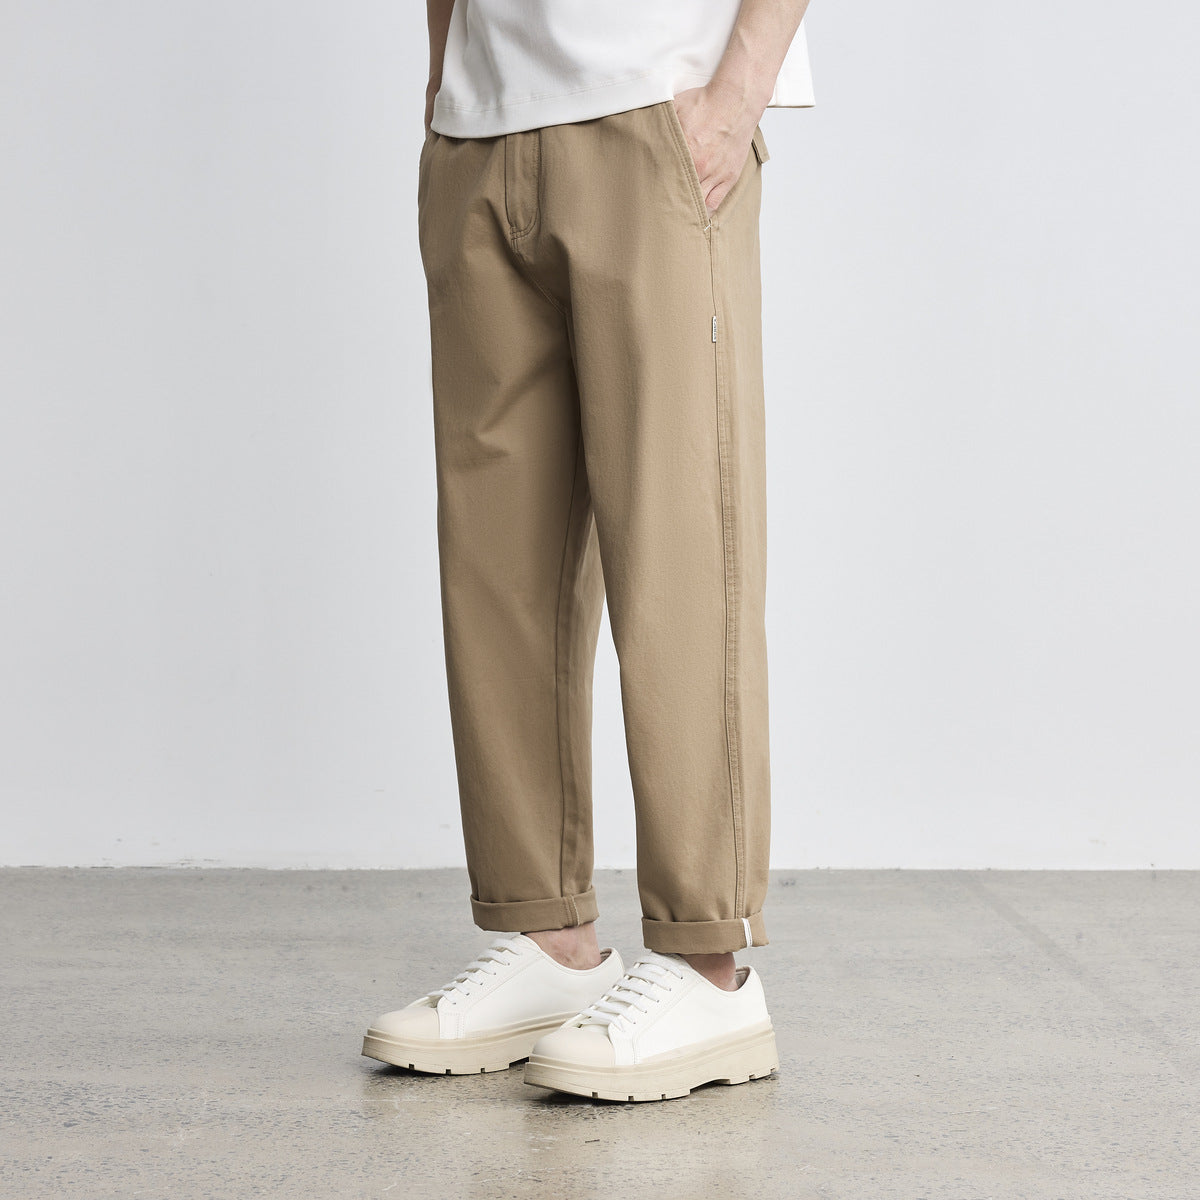 Cotton Straight Casual Pants Simple Light Business